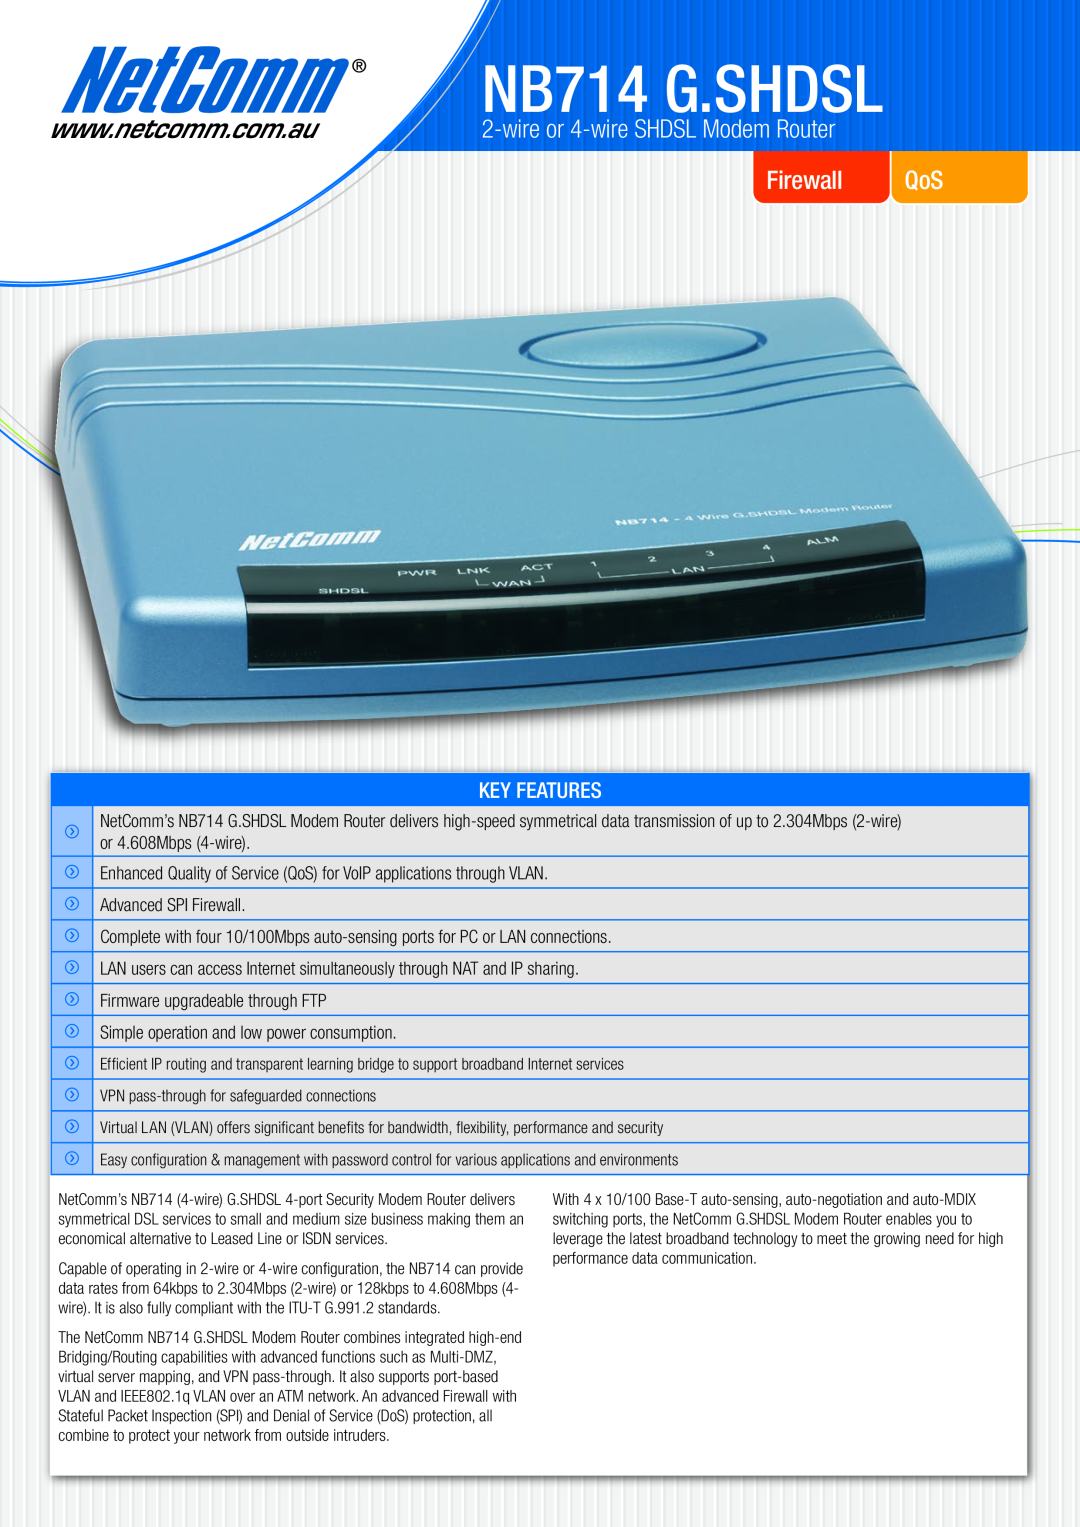 NetComm manual NB714 G.SHDSL, wire or 4-wire SHDSL Modem Router Firewall QoS, Key Features, Advanced SPI Firewall 